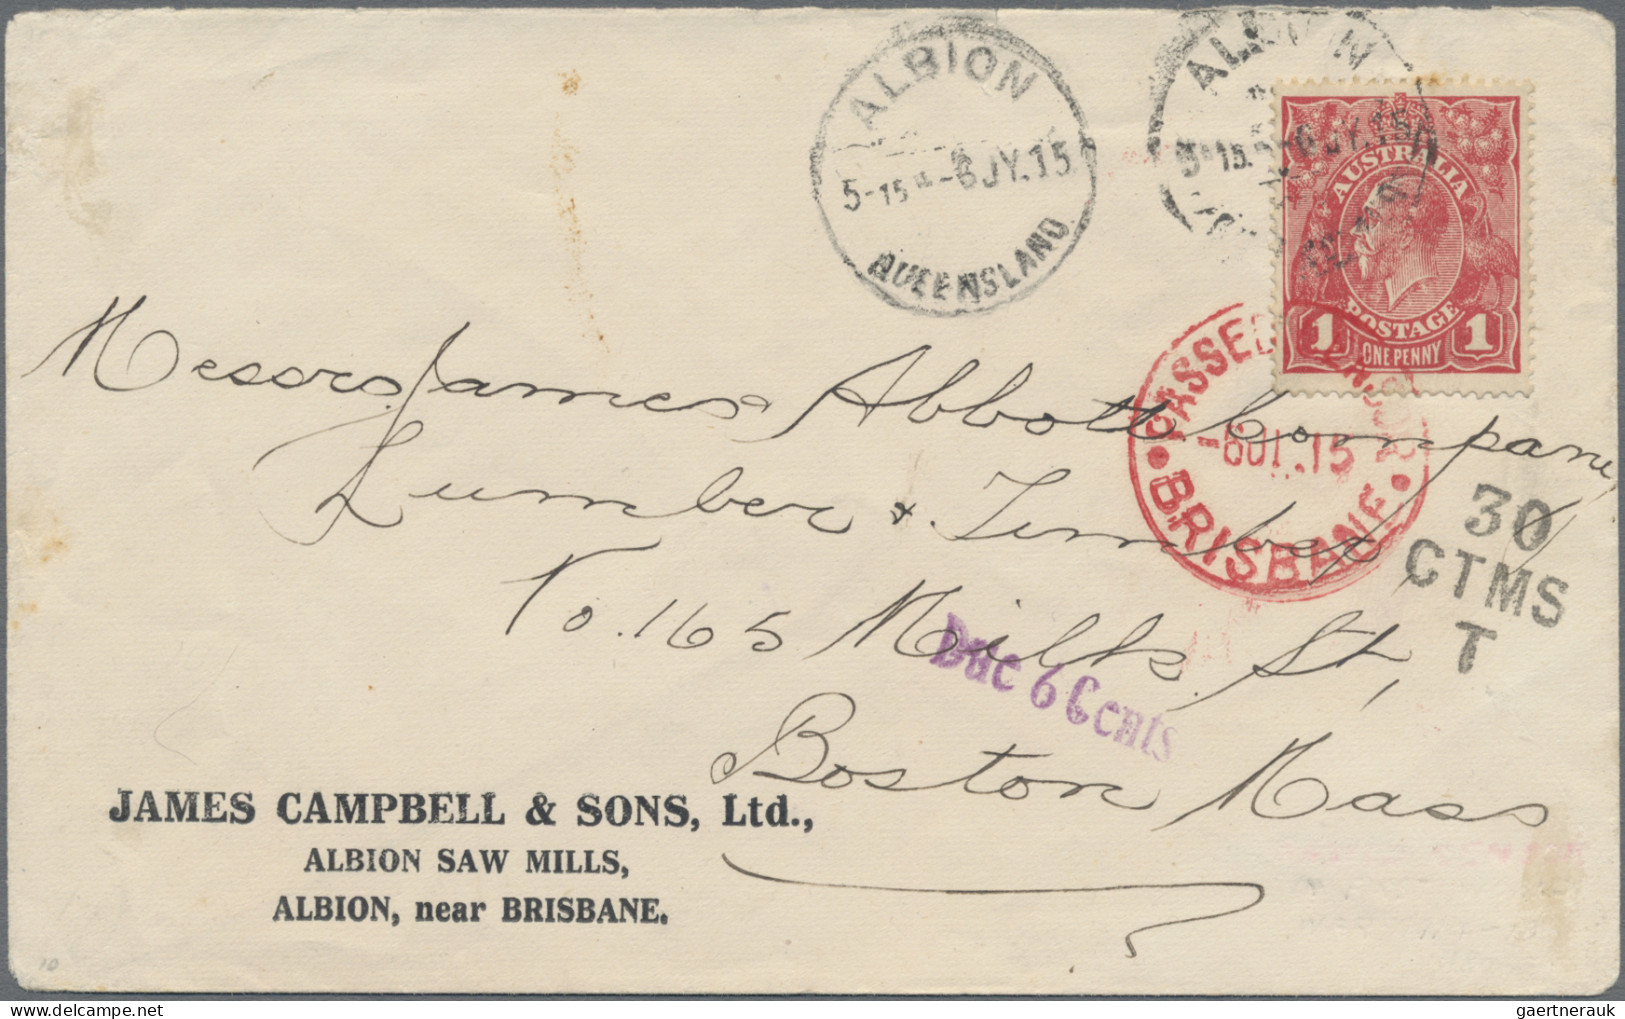 Australia: 1915/1918, 1d red KGV (ACSC 71 & 72), very interesting selection of 1